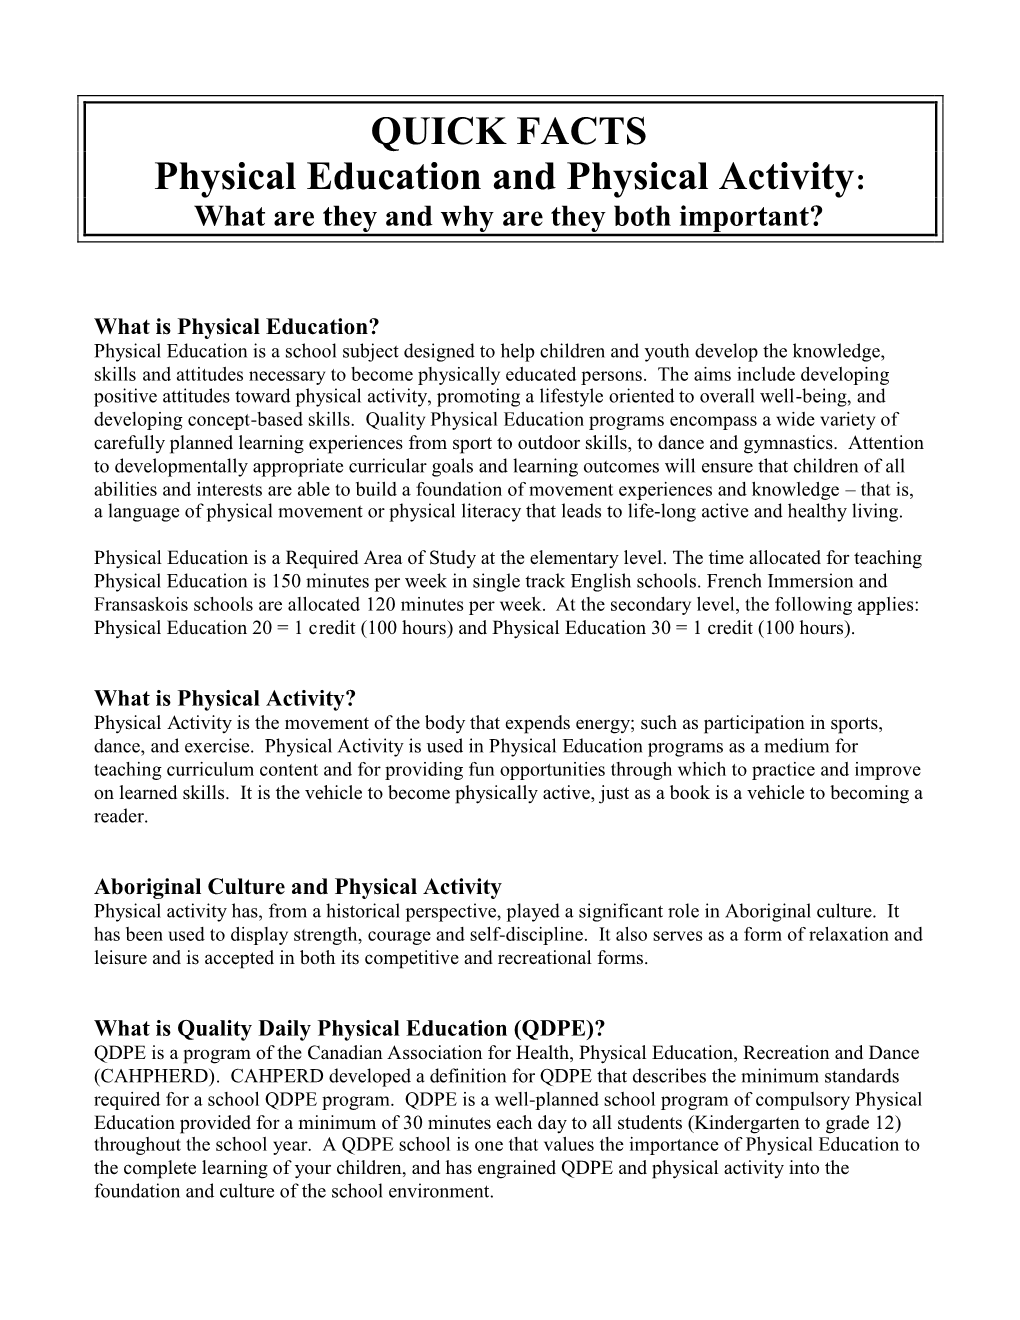 QUICK FACTS Physical Education and Physical Activity: What Are They and Why Are They Both Important?